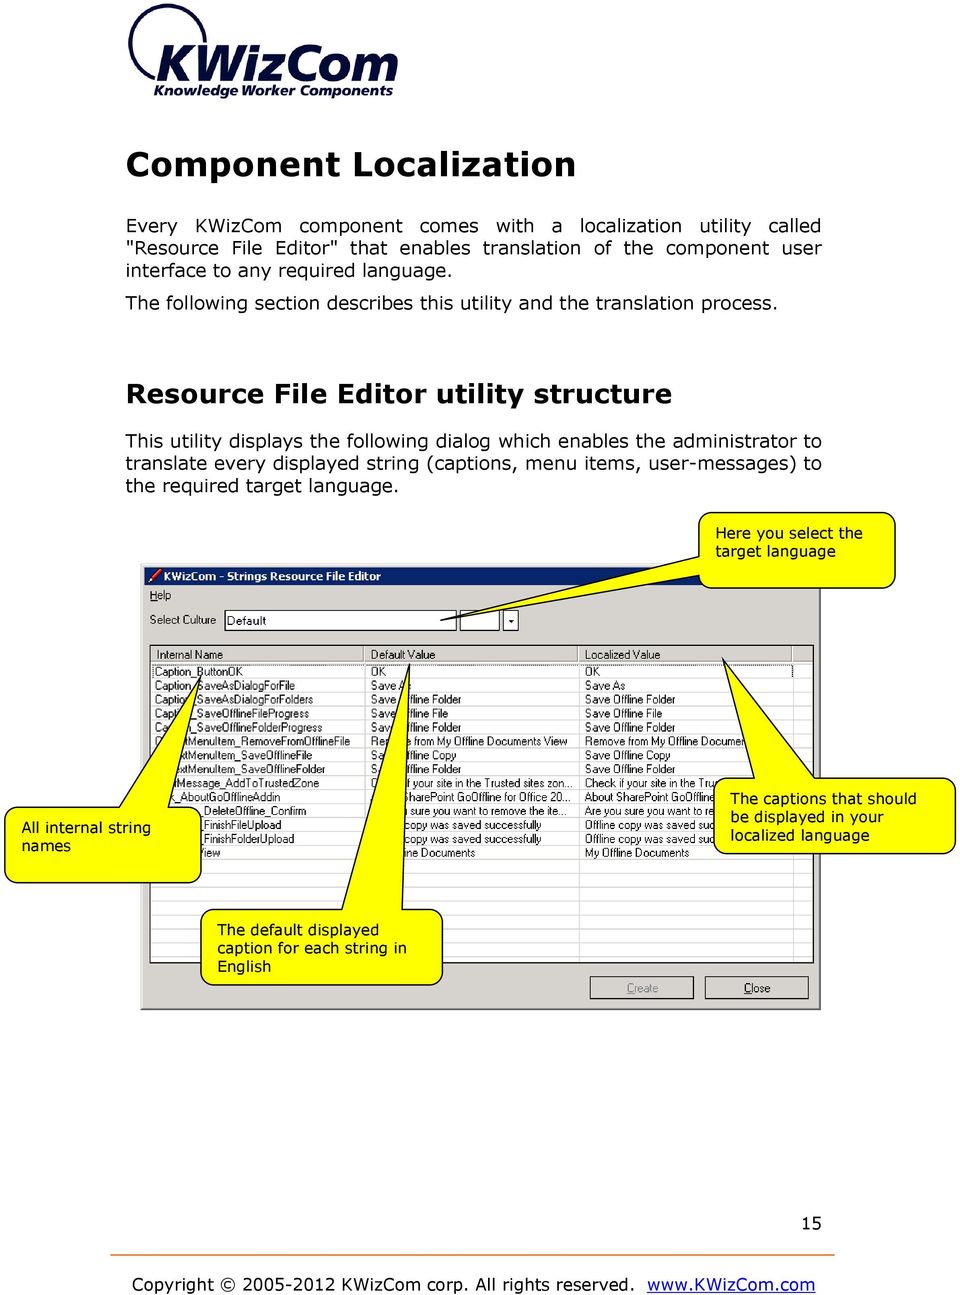 Resource File Editor utility structure This utility displays the following dialog which enables the administrator to translate every displayed string (captions, menu